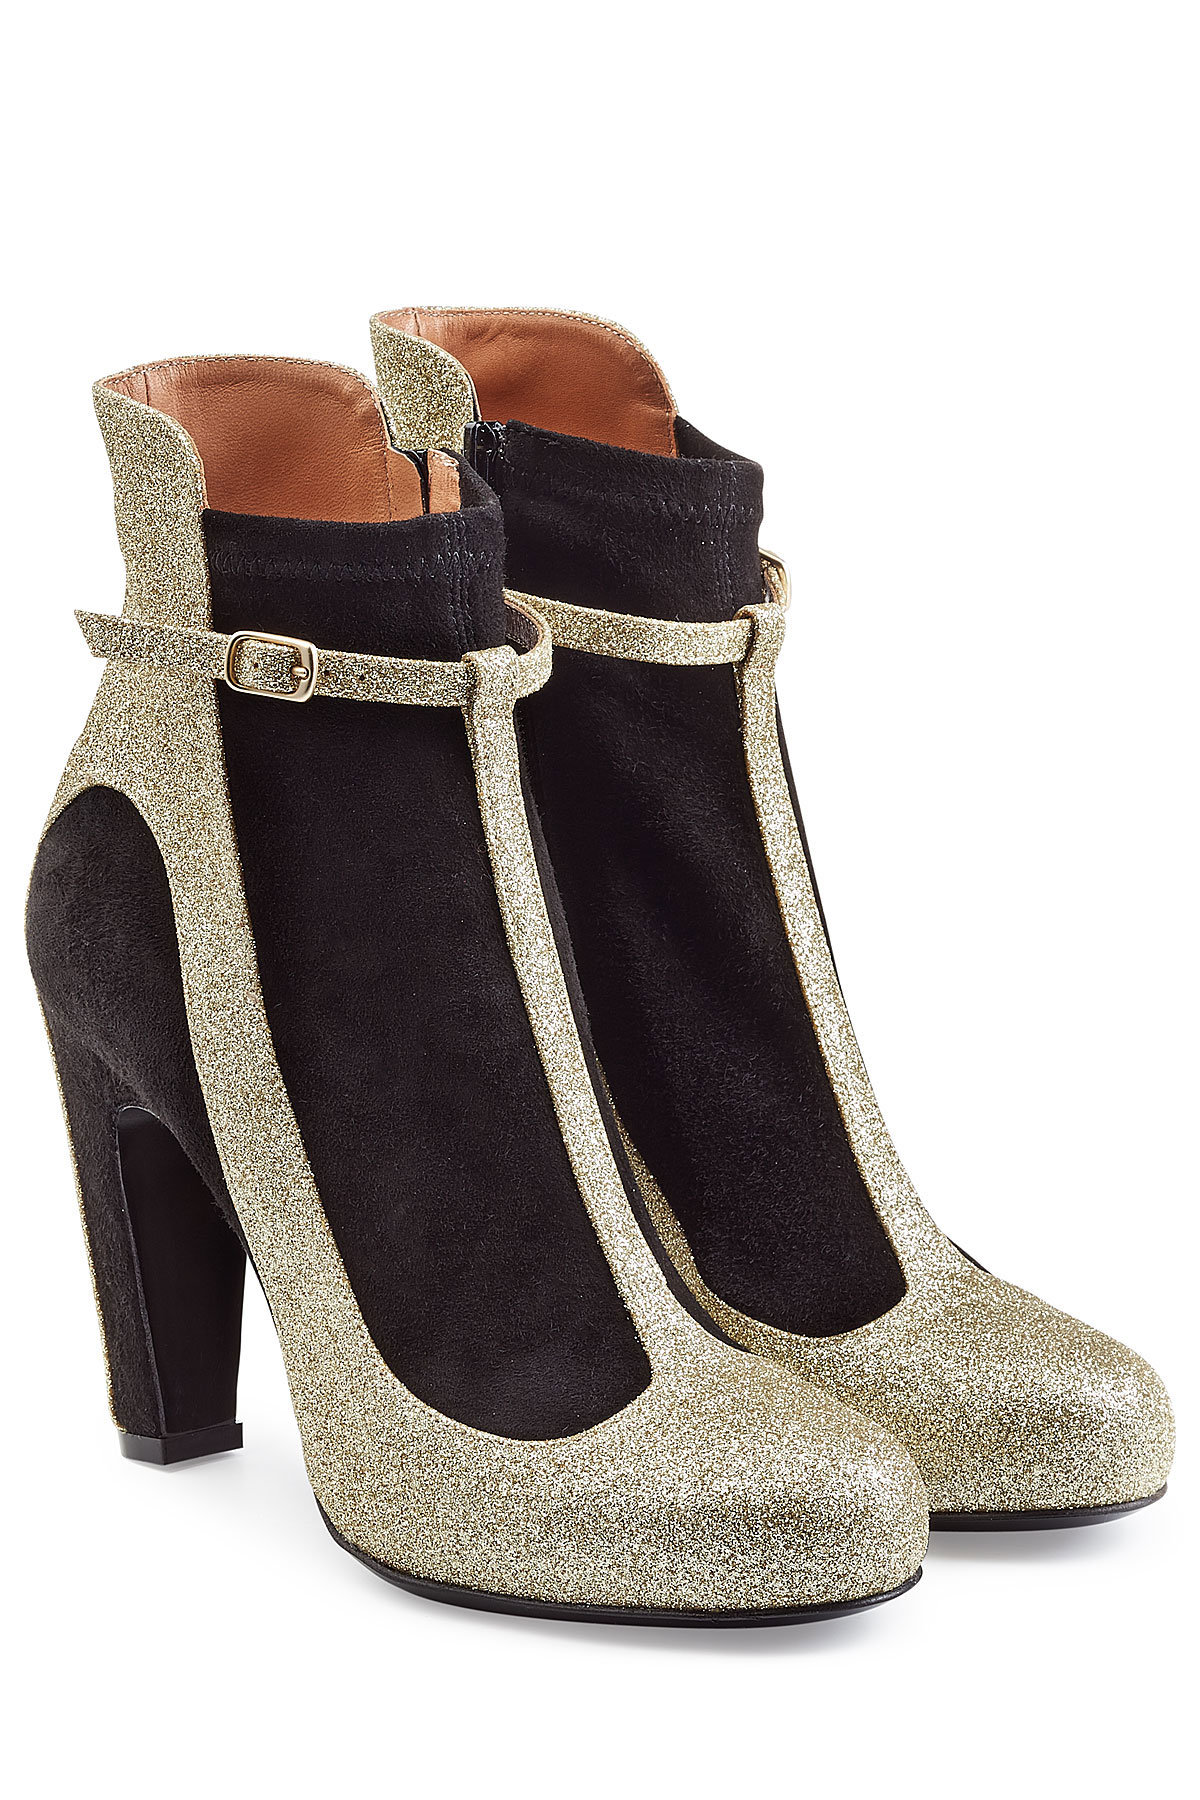 Glitter and Suede Ankle Boots by Maison Margiela